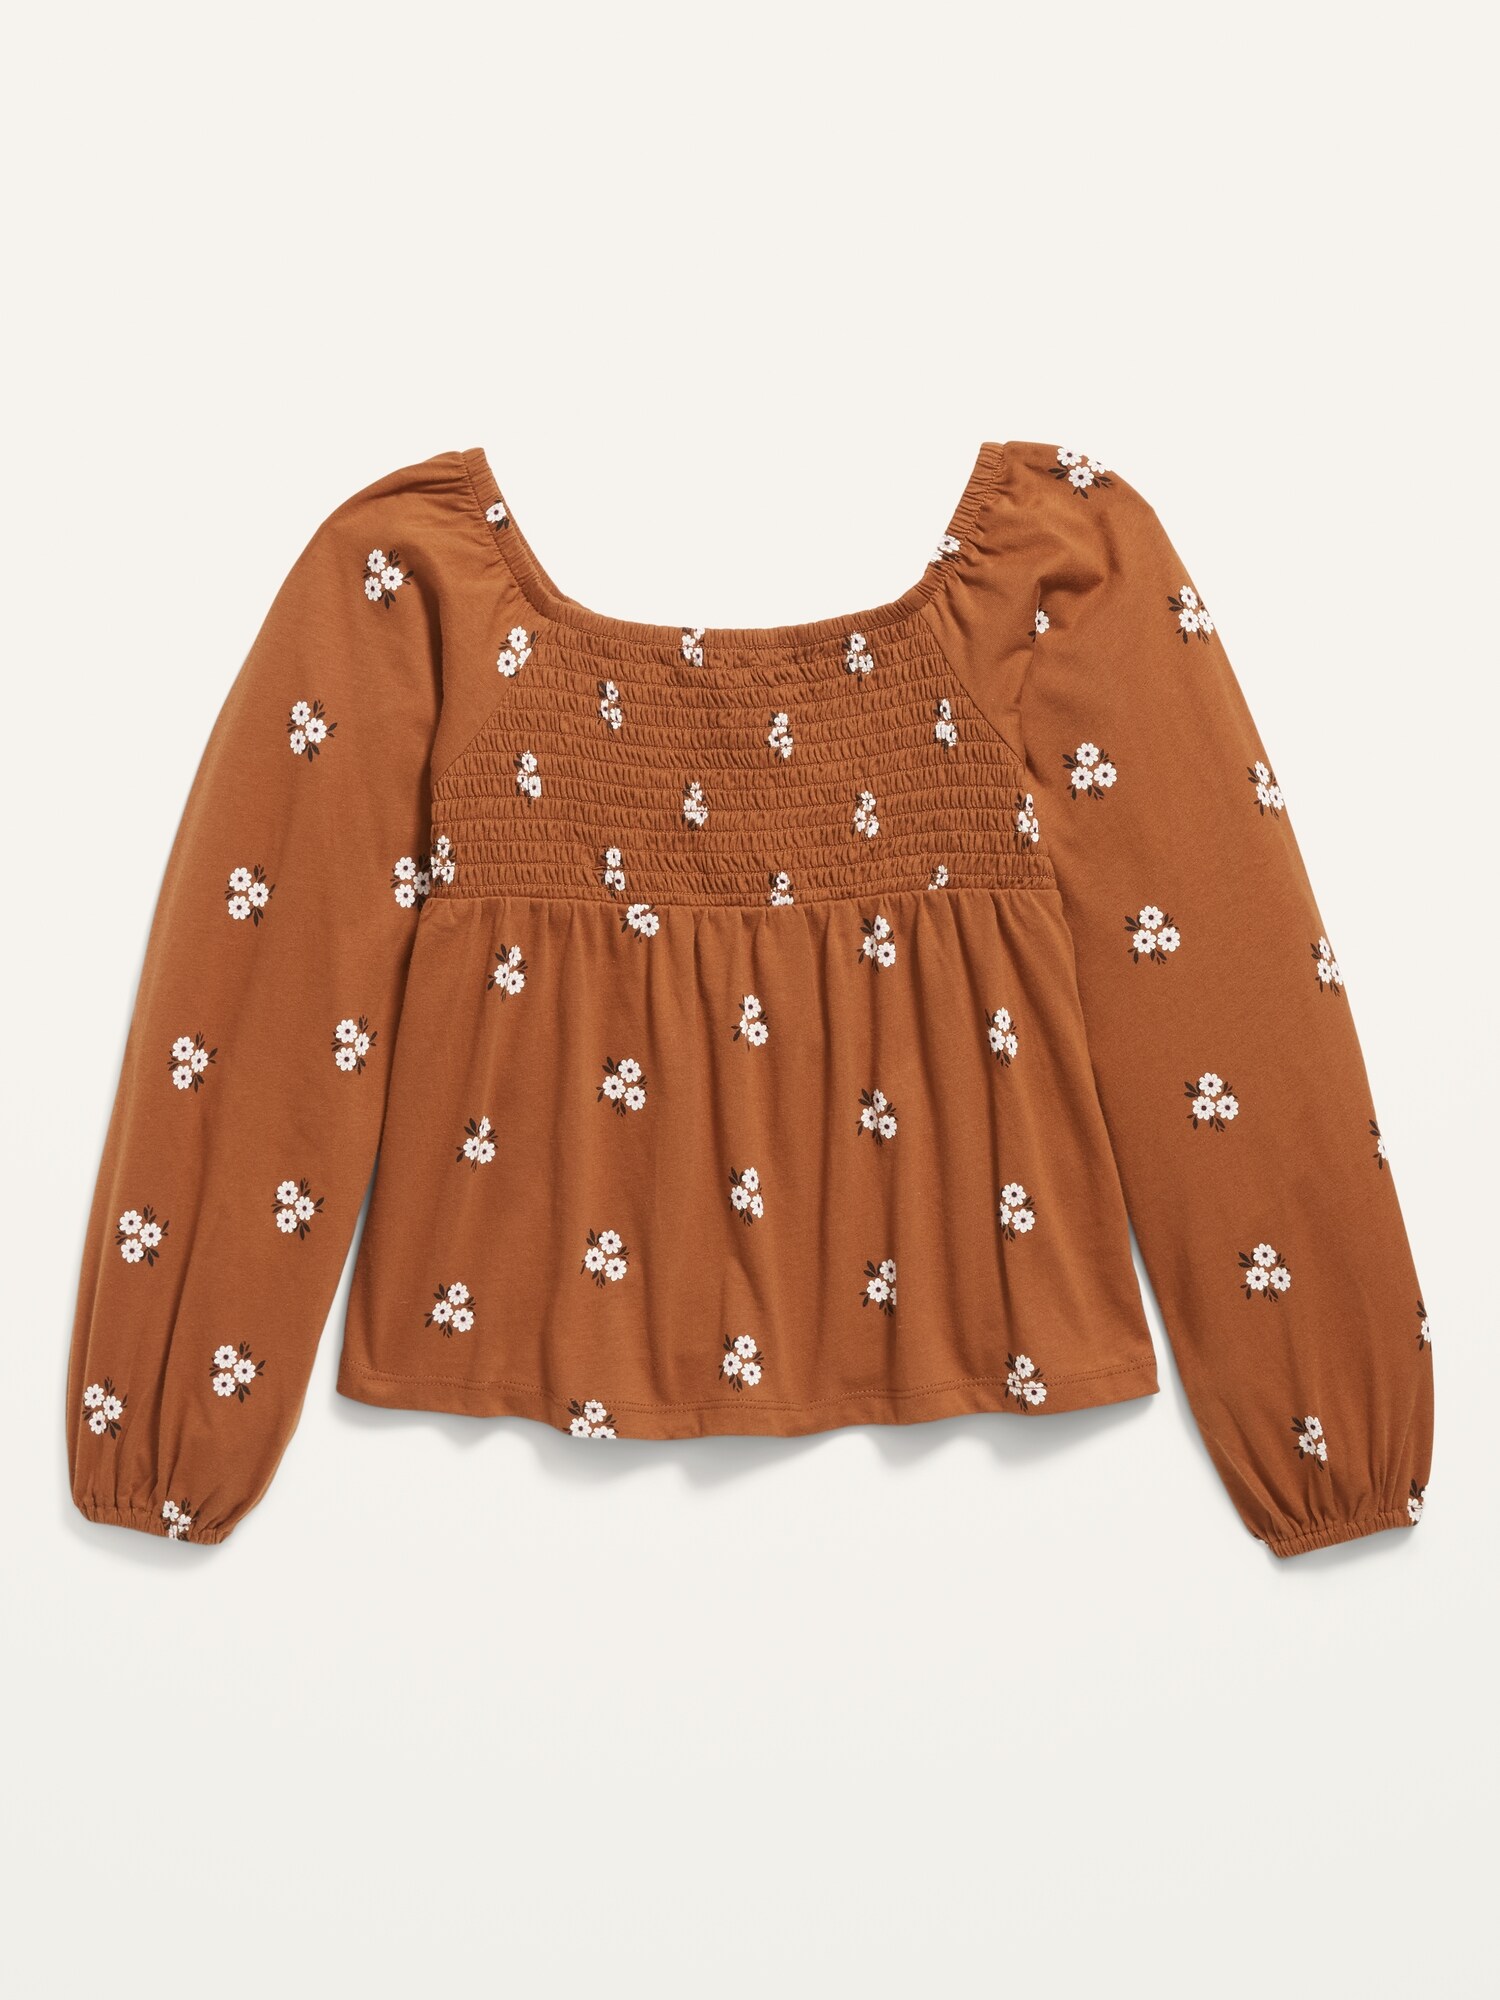 Girls' Long-Sleeve Tops, Blouses, Florals & Jersey